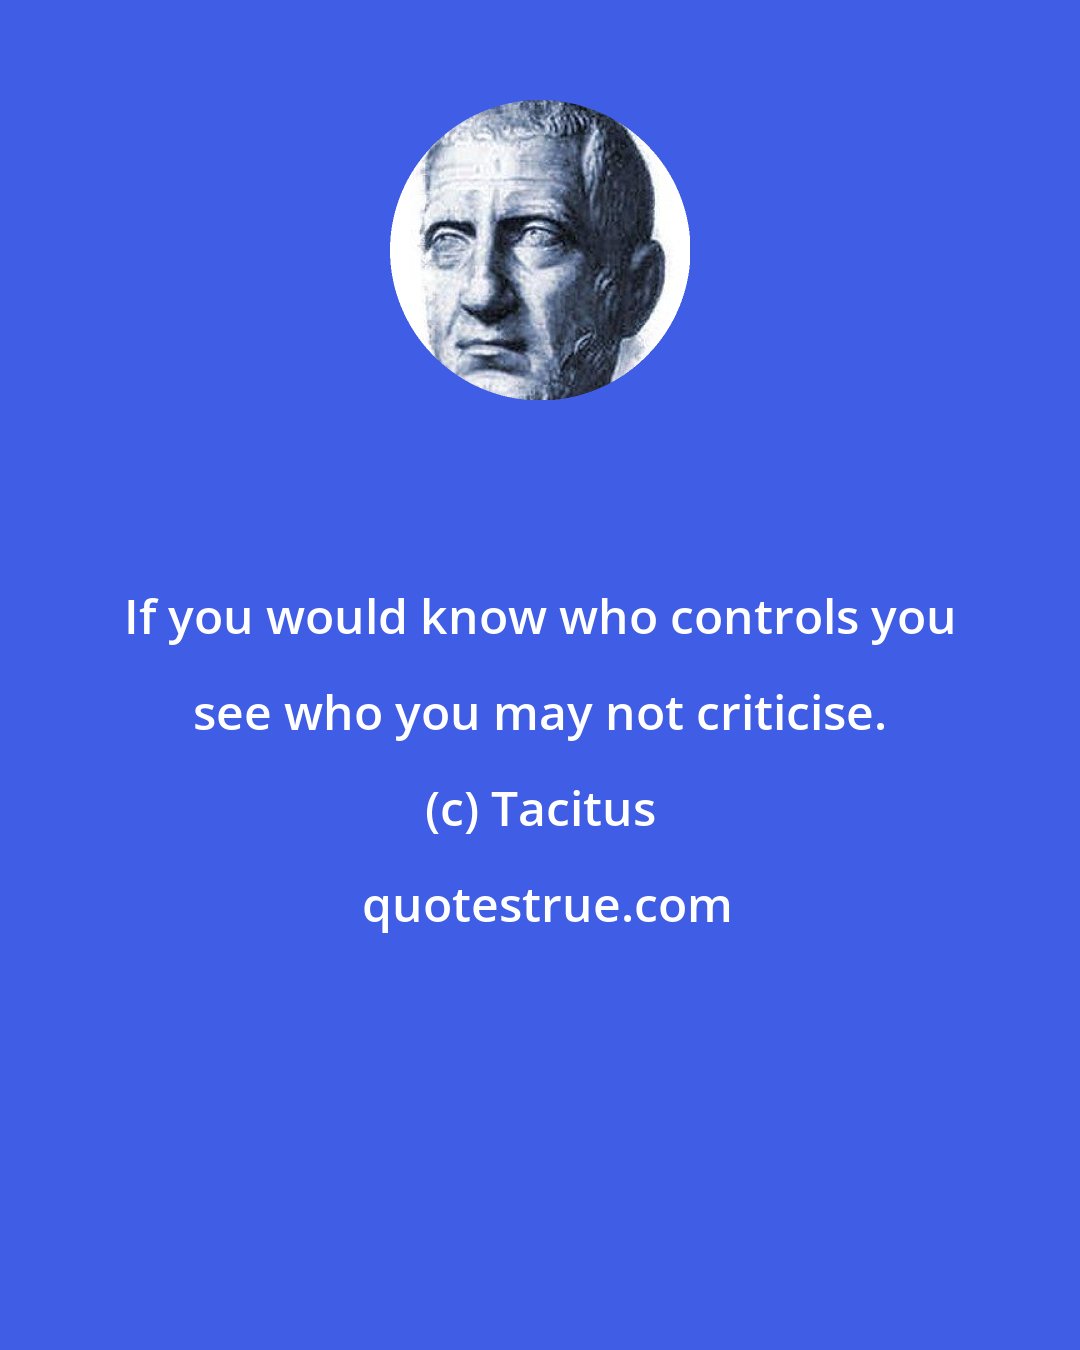 Tacitus: If you would know who controls you see who you may not criticise.